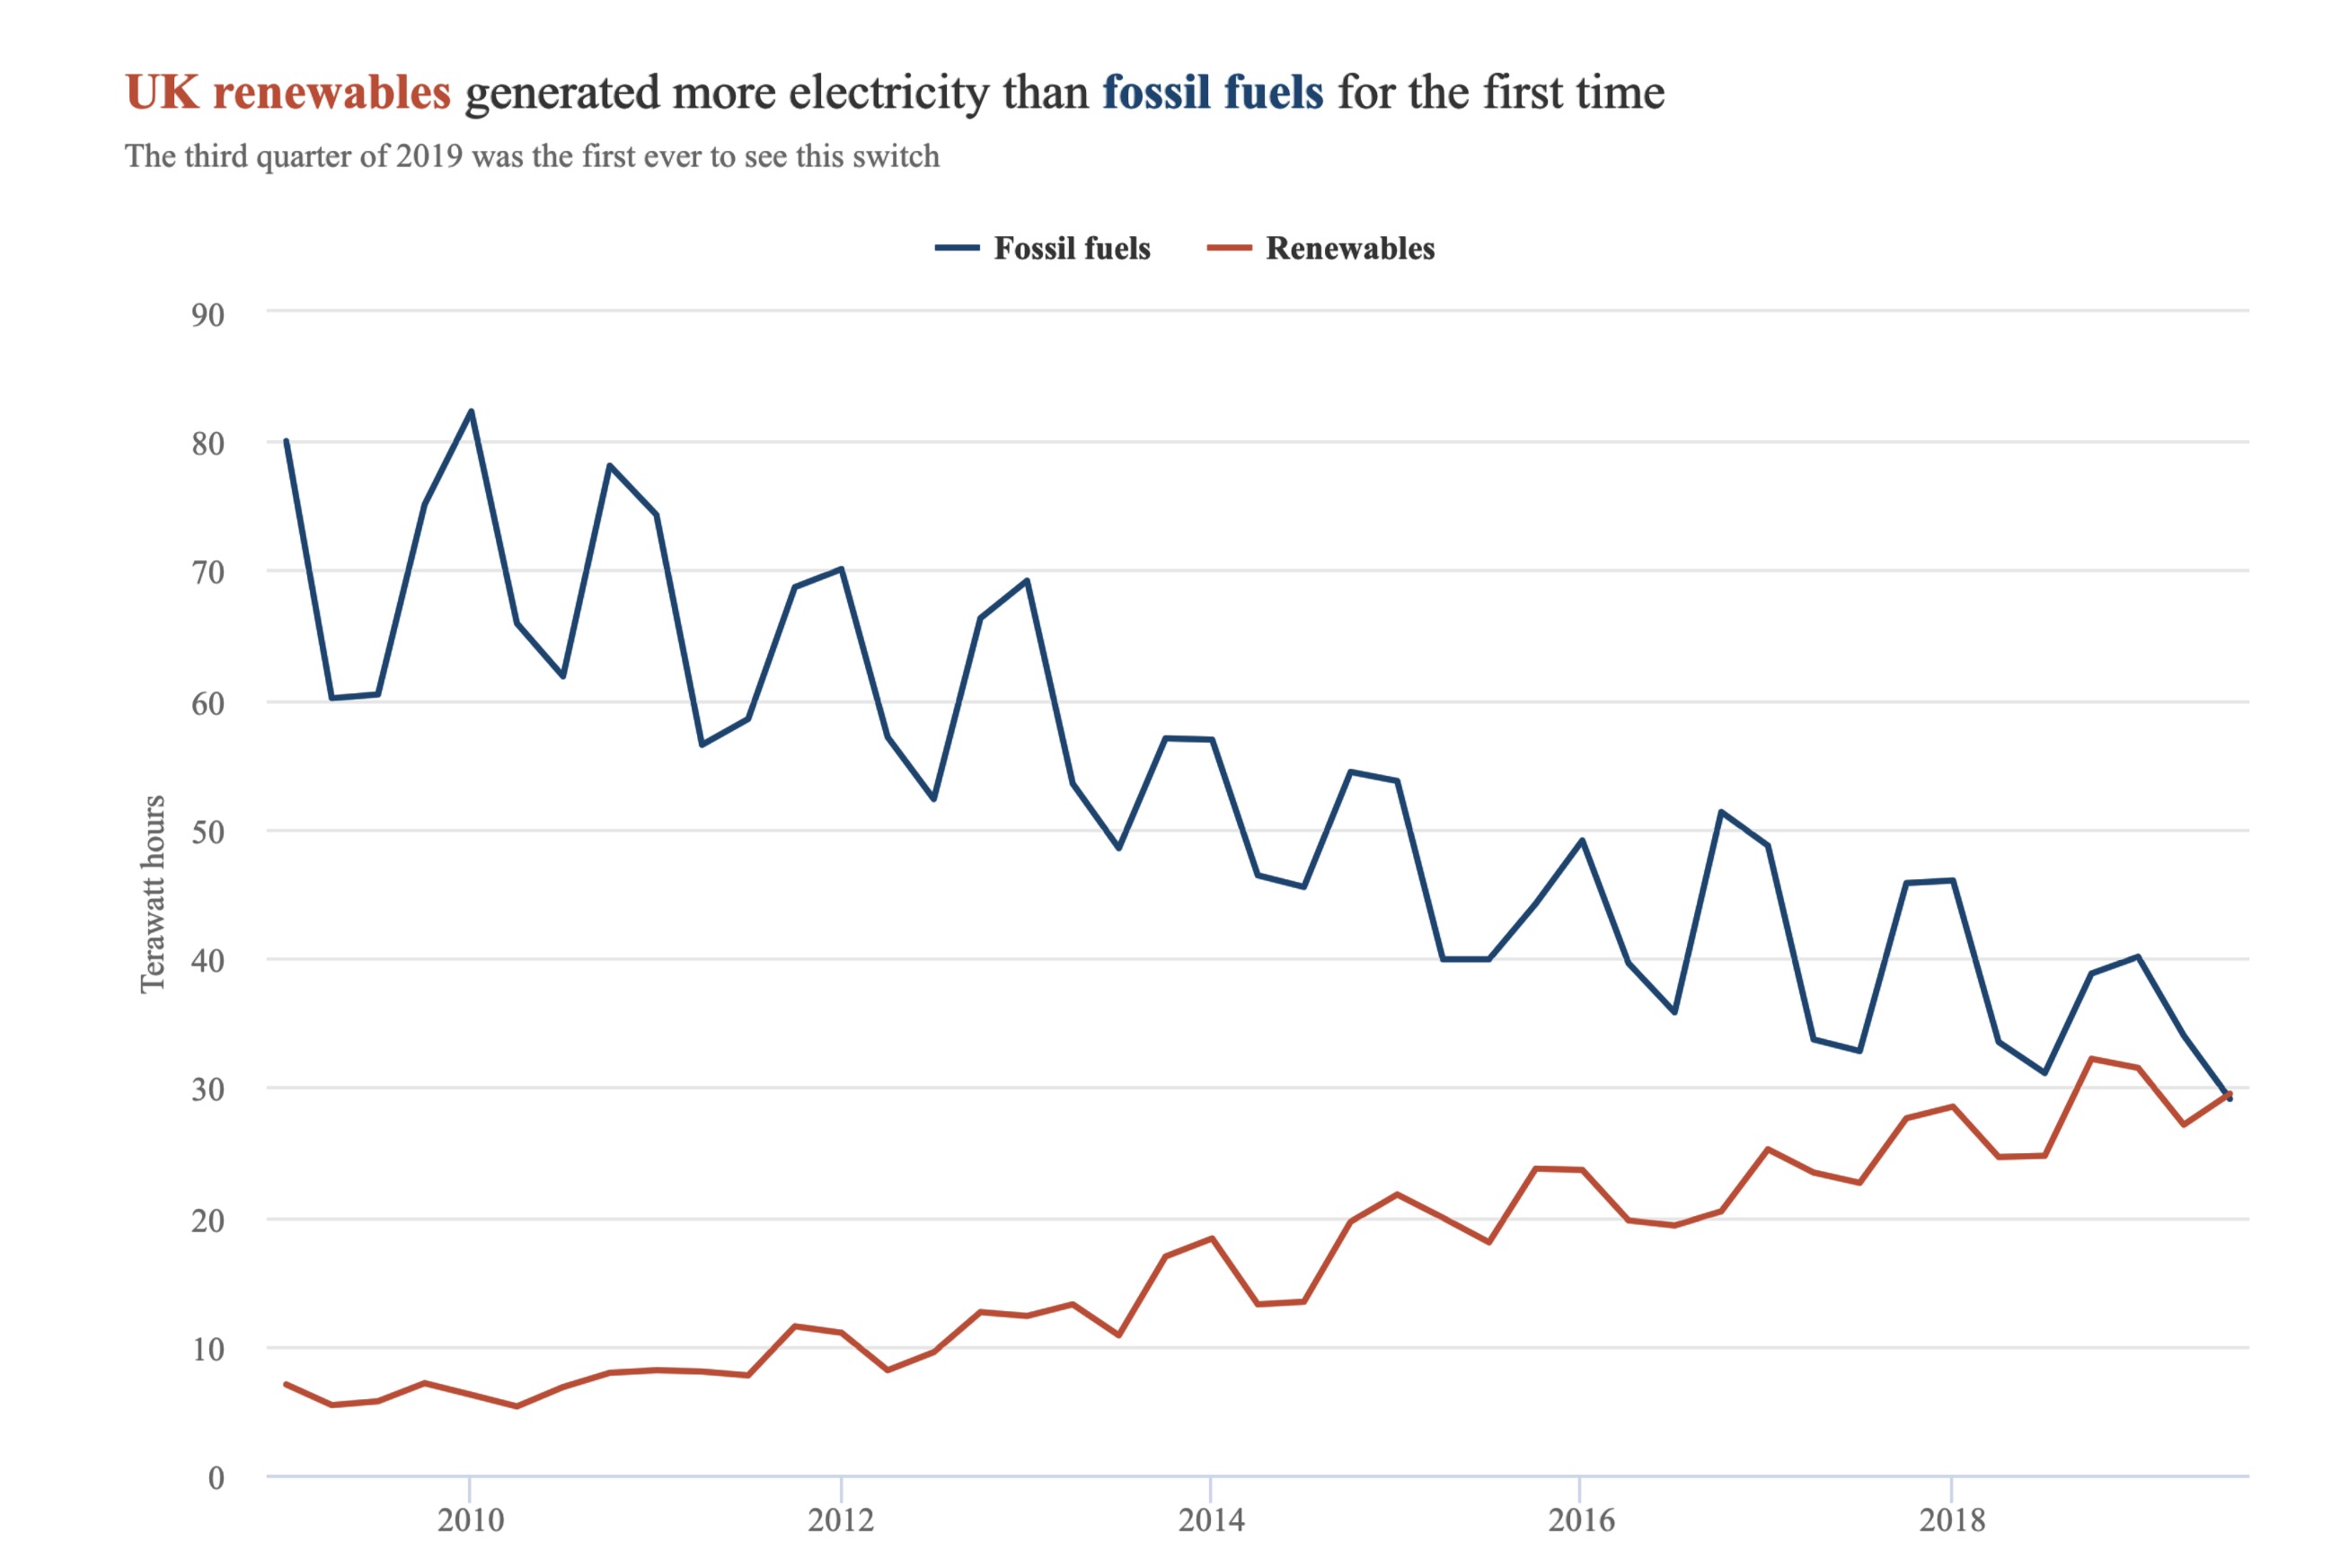 Quarterly electricity generation in the UK between 2009 and the third quarter of 2019, in terawatt hours, with fossil-fuel output shown with a blue line (coal, oil and gas) and renewables shown in red (wind, biomass, solar and hydro). Source: BEIS Energy Trends and Carbon Brief analysis of data from BM Reports. Chart by Carbon Brief.